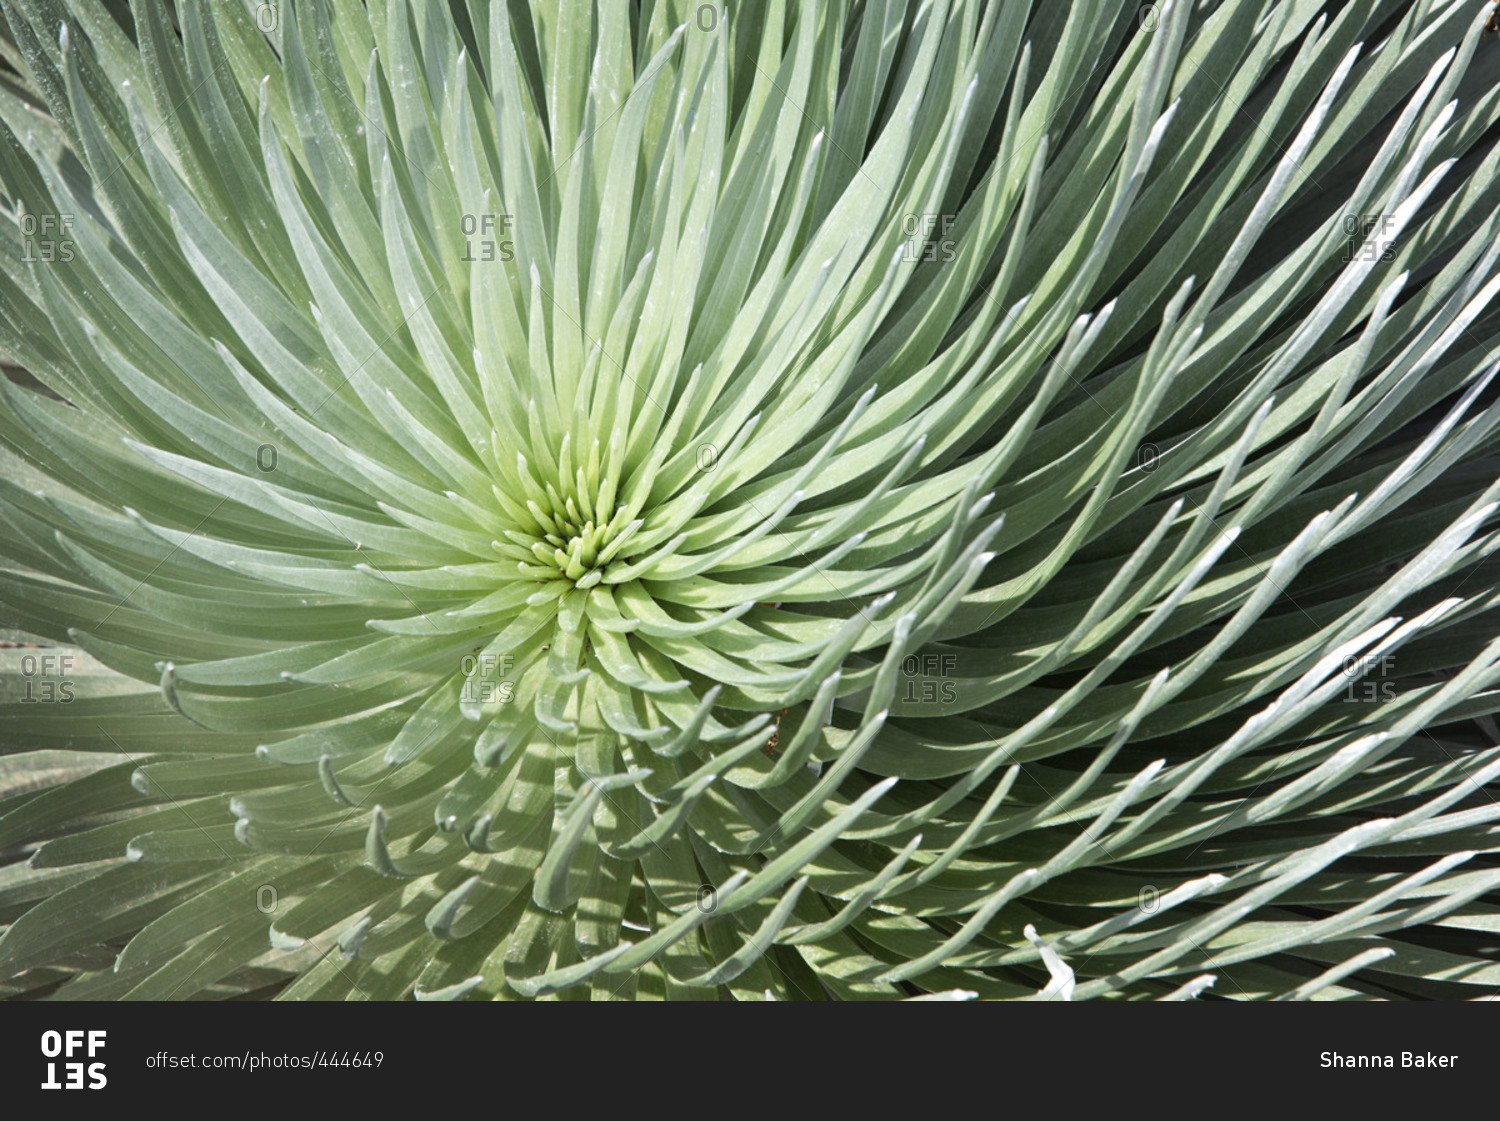 Close-up of the silver leaves of the Haleakala Silversword (also known as the Ahinahina), on the slopes of Haleakala volcano within Haleakala National Park on Maui, Hawaii